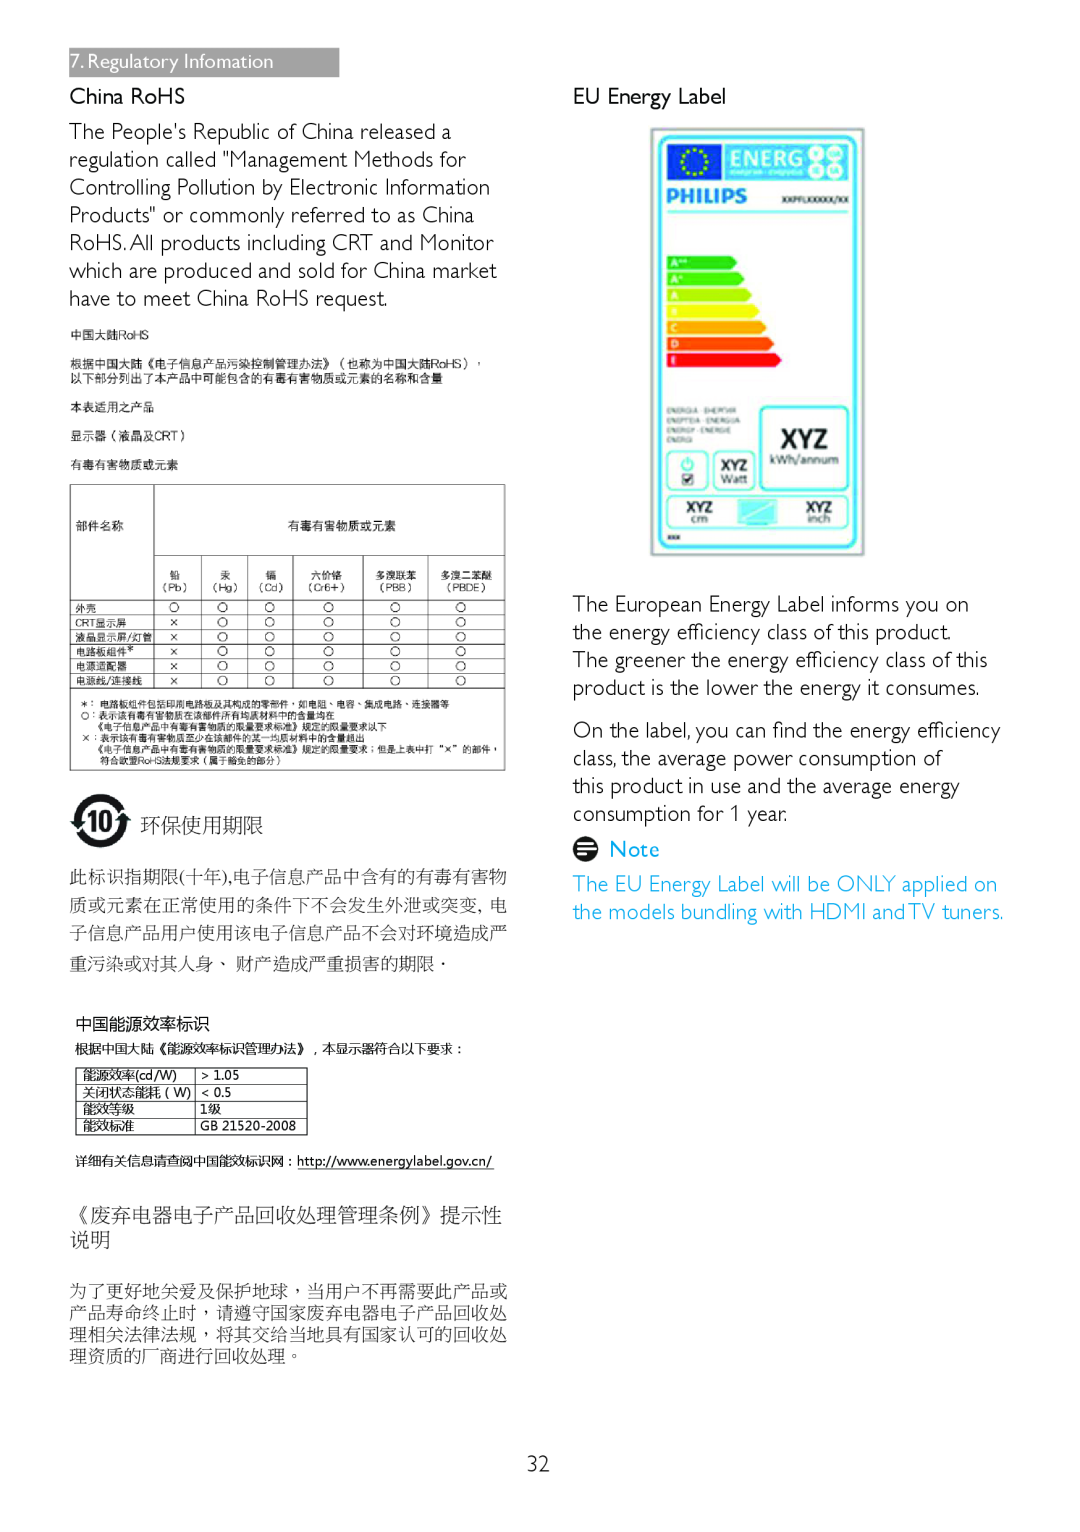 Philips 271S4LPYEB China RoHS, EU Energy Label, this product in use and the average energy consumption for 1 year, 环保使用期限 